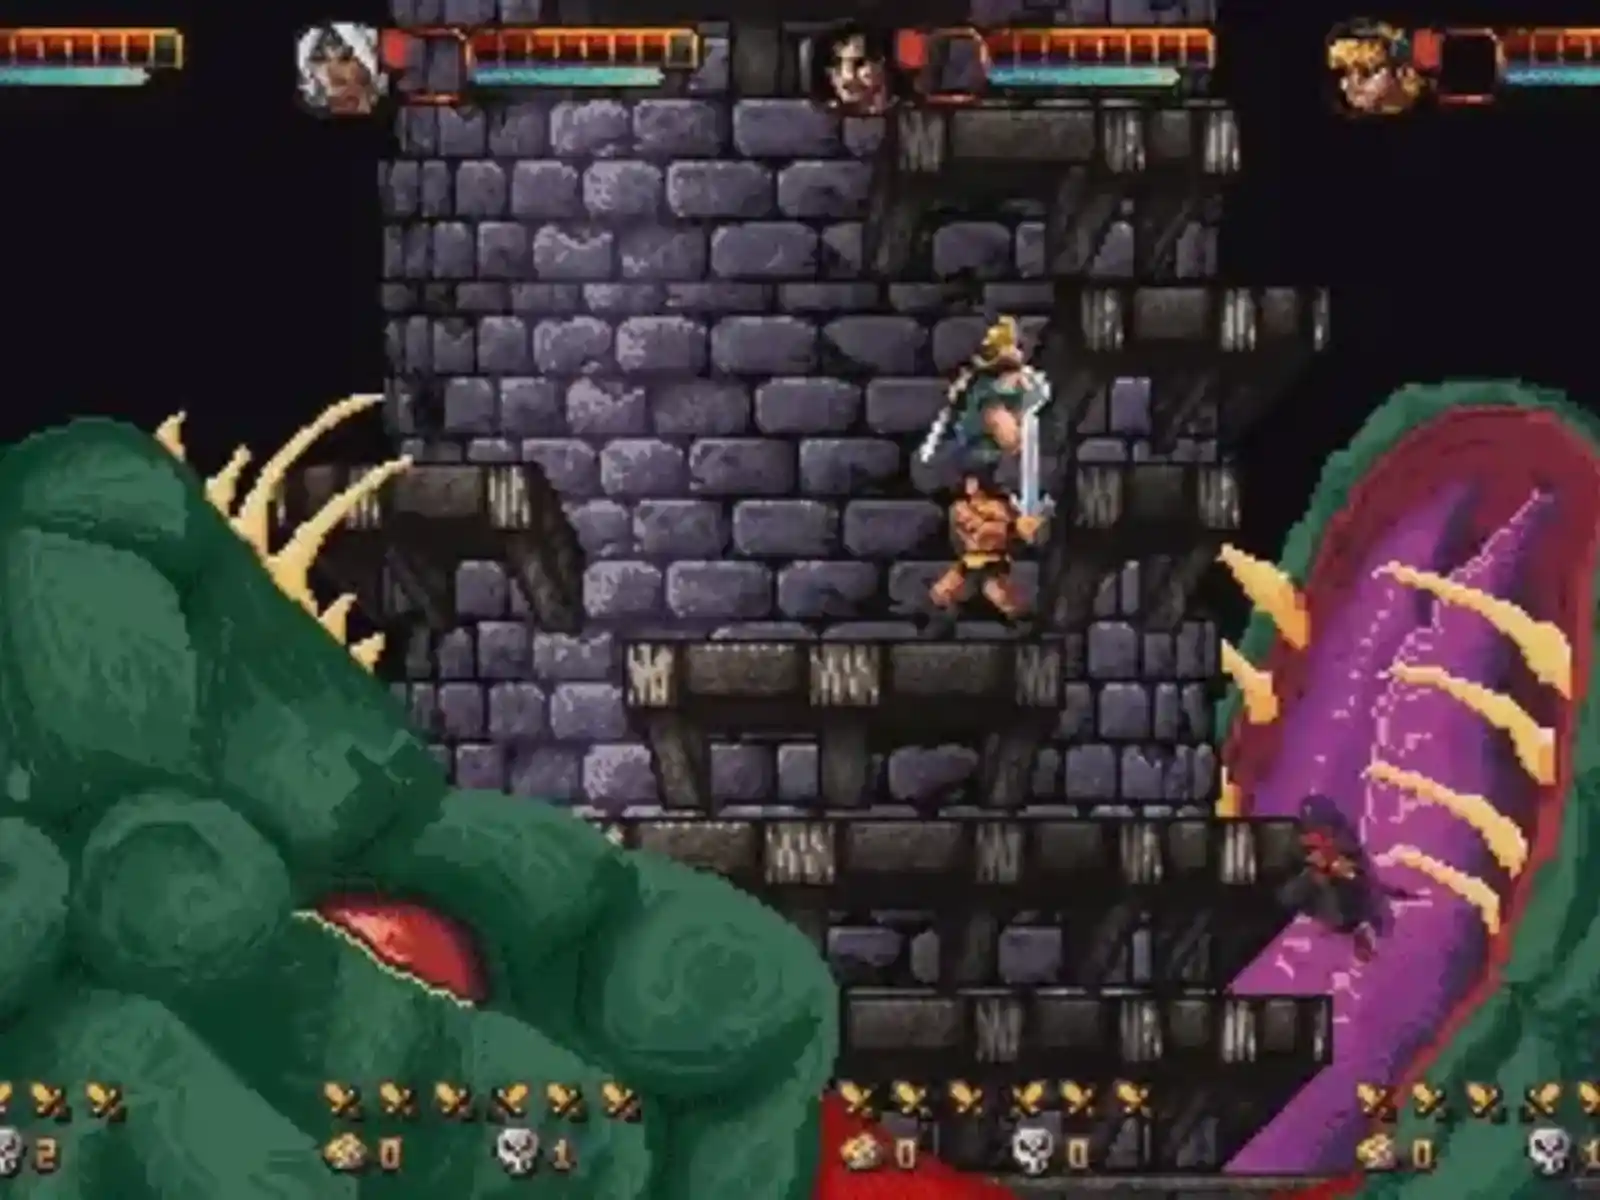 Abathor game gif featuring two characters on a stone tower battling a large green and purple monster